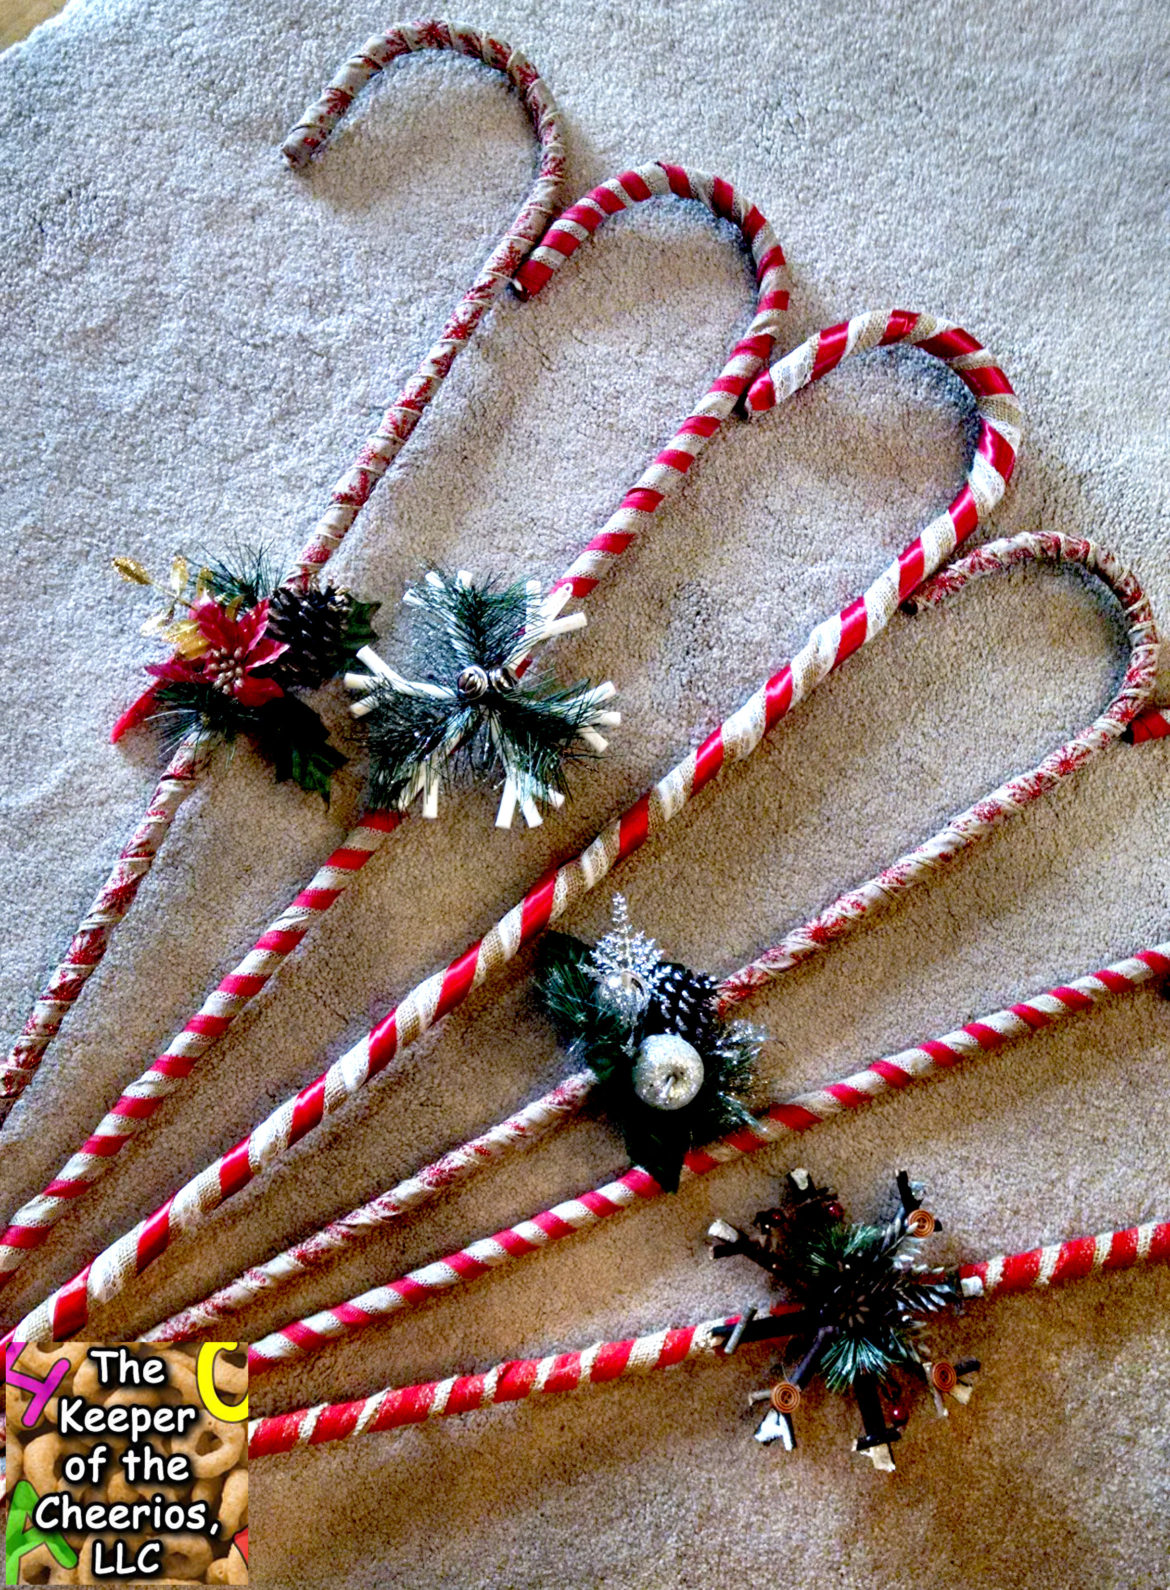 burlap-wrapped-candy-canes-8